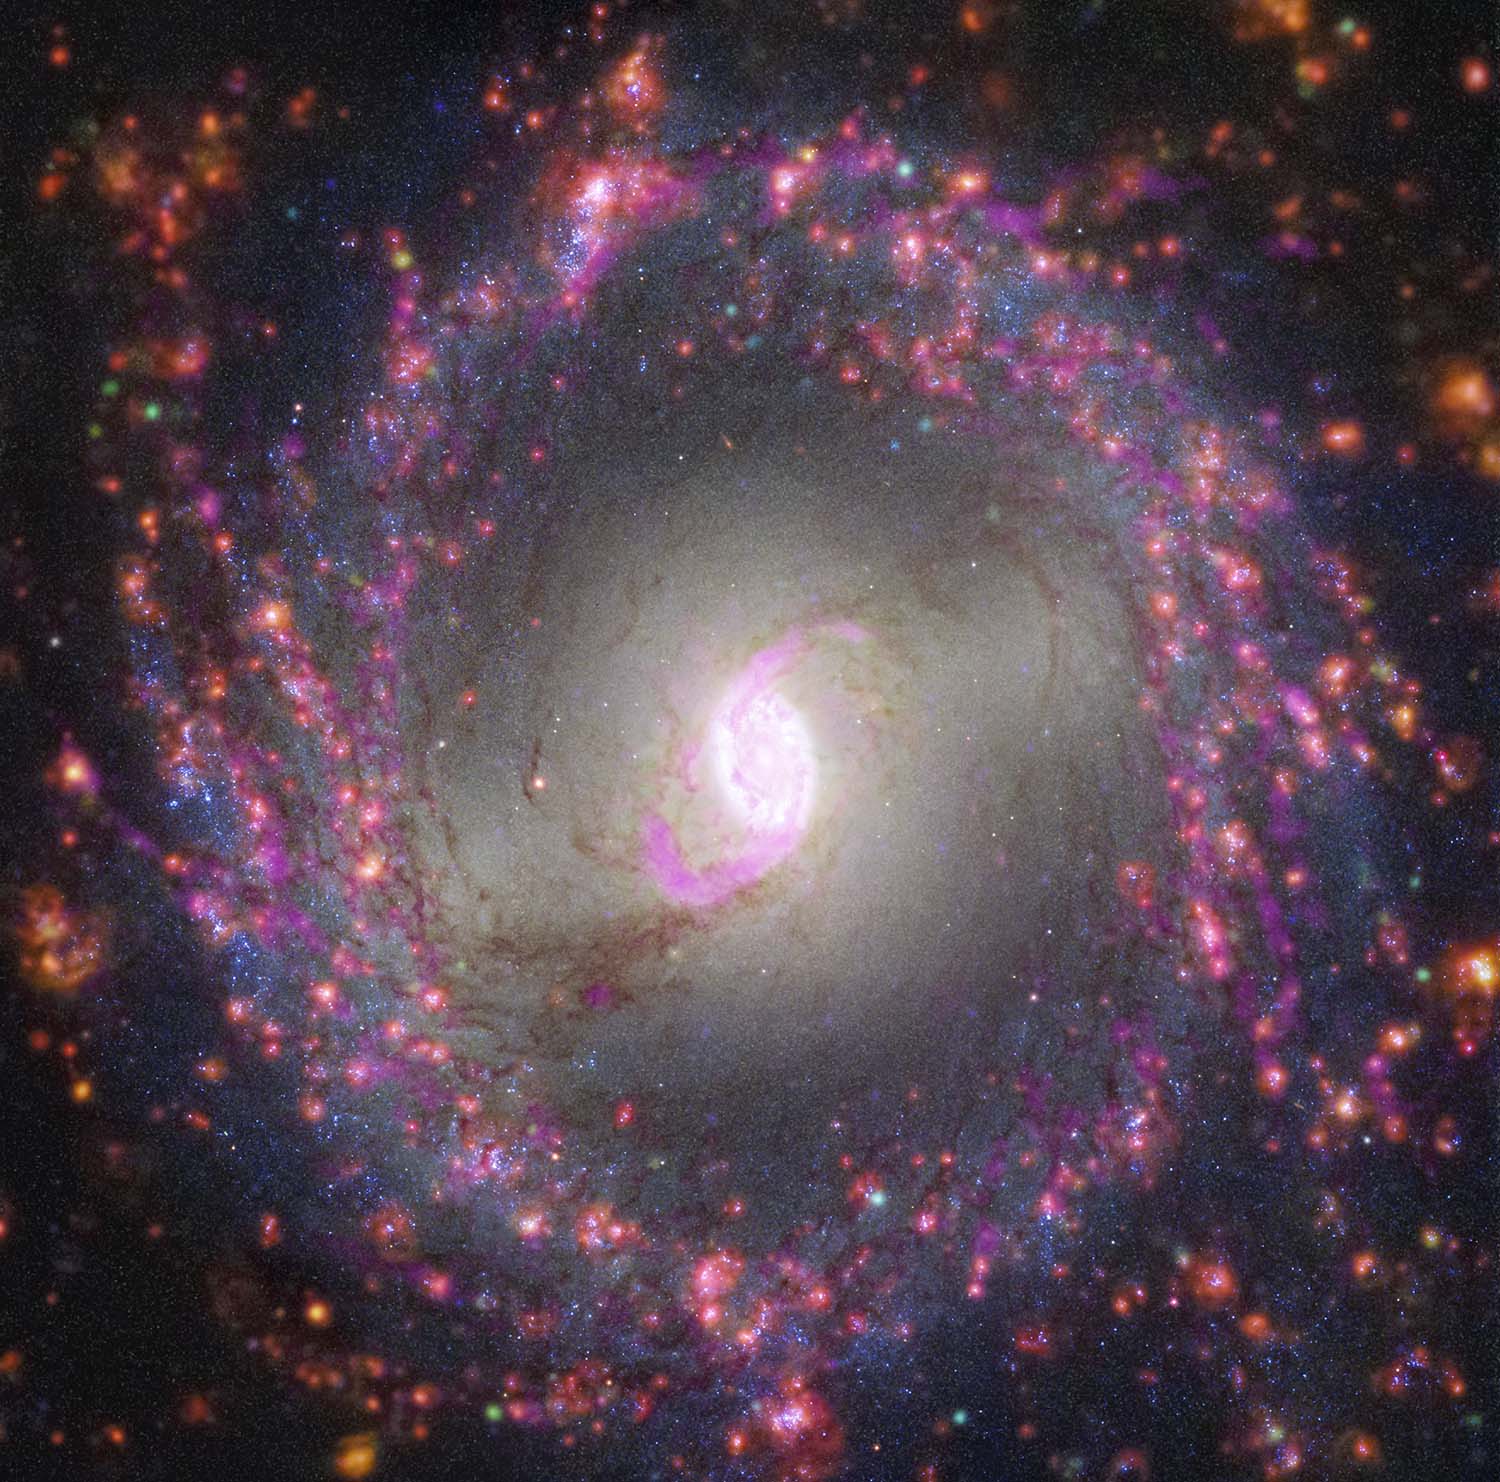 This image of spiral galaxy NGC 3351 combines observations from several observatories to reveal details about its stars and gas. Radio observations from the Atacama Large Millimeter/submillimeter Array (ALMA), show dense molecular gas in magenta. The Very Large Telescope’s Multi Unit Spectroscopic Explorer (MUSE) instrument, highlights where young massive stars illuminate their surroundings in red. The Hubble Space Telescope’s images highlight dust lanes in white and newly formed stars in blue. High-resolution infrared images from the Webb Space Telescope will help researchers identify where stars are forming behind dust and study the earliest stages of star formation in this galaxy.